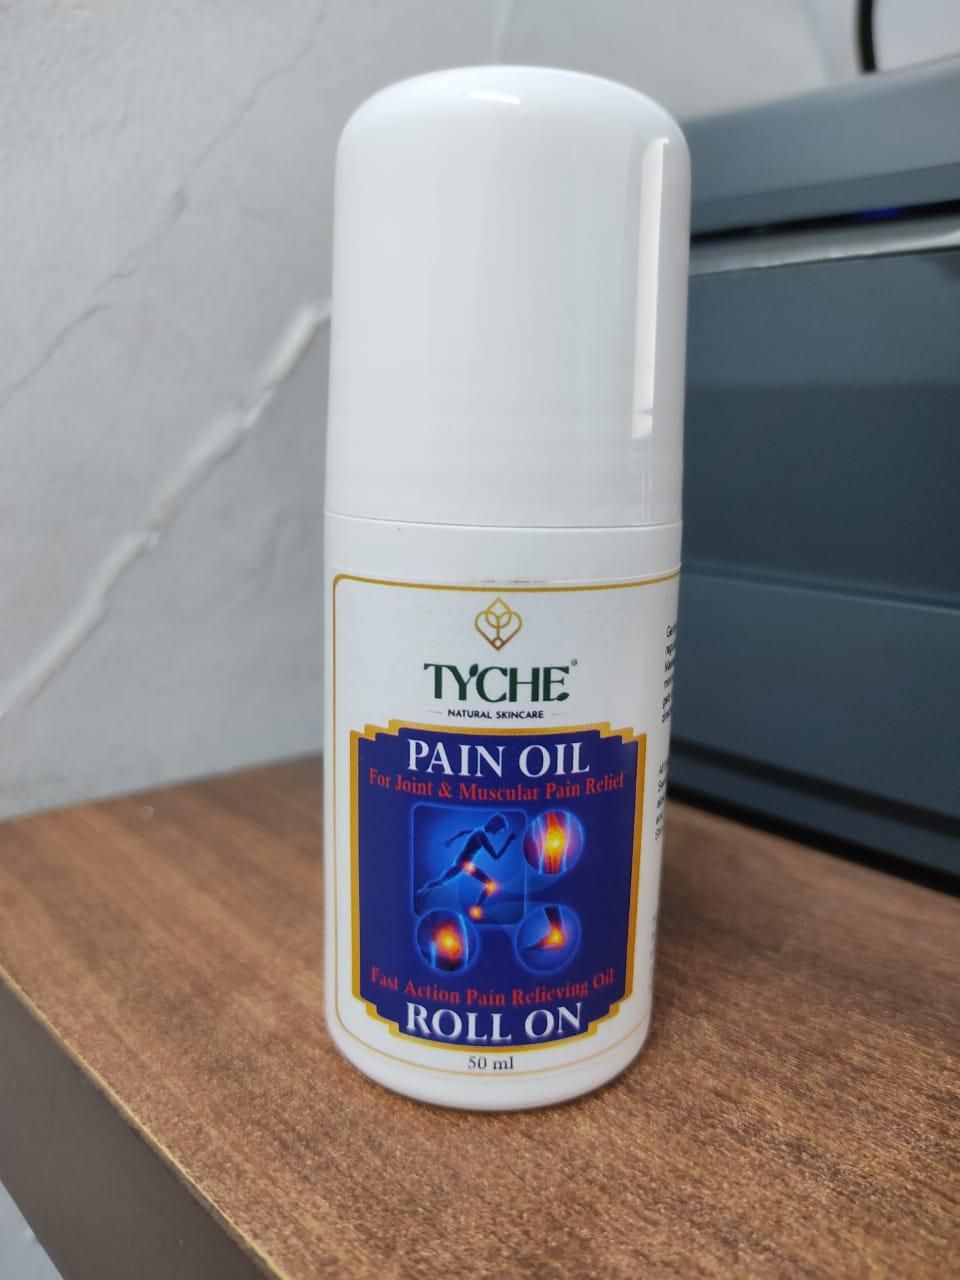 Tyche Pain Oil - Joint & Muscular Pain Relief Oil 50 ml (Pack of 2)